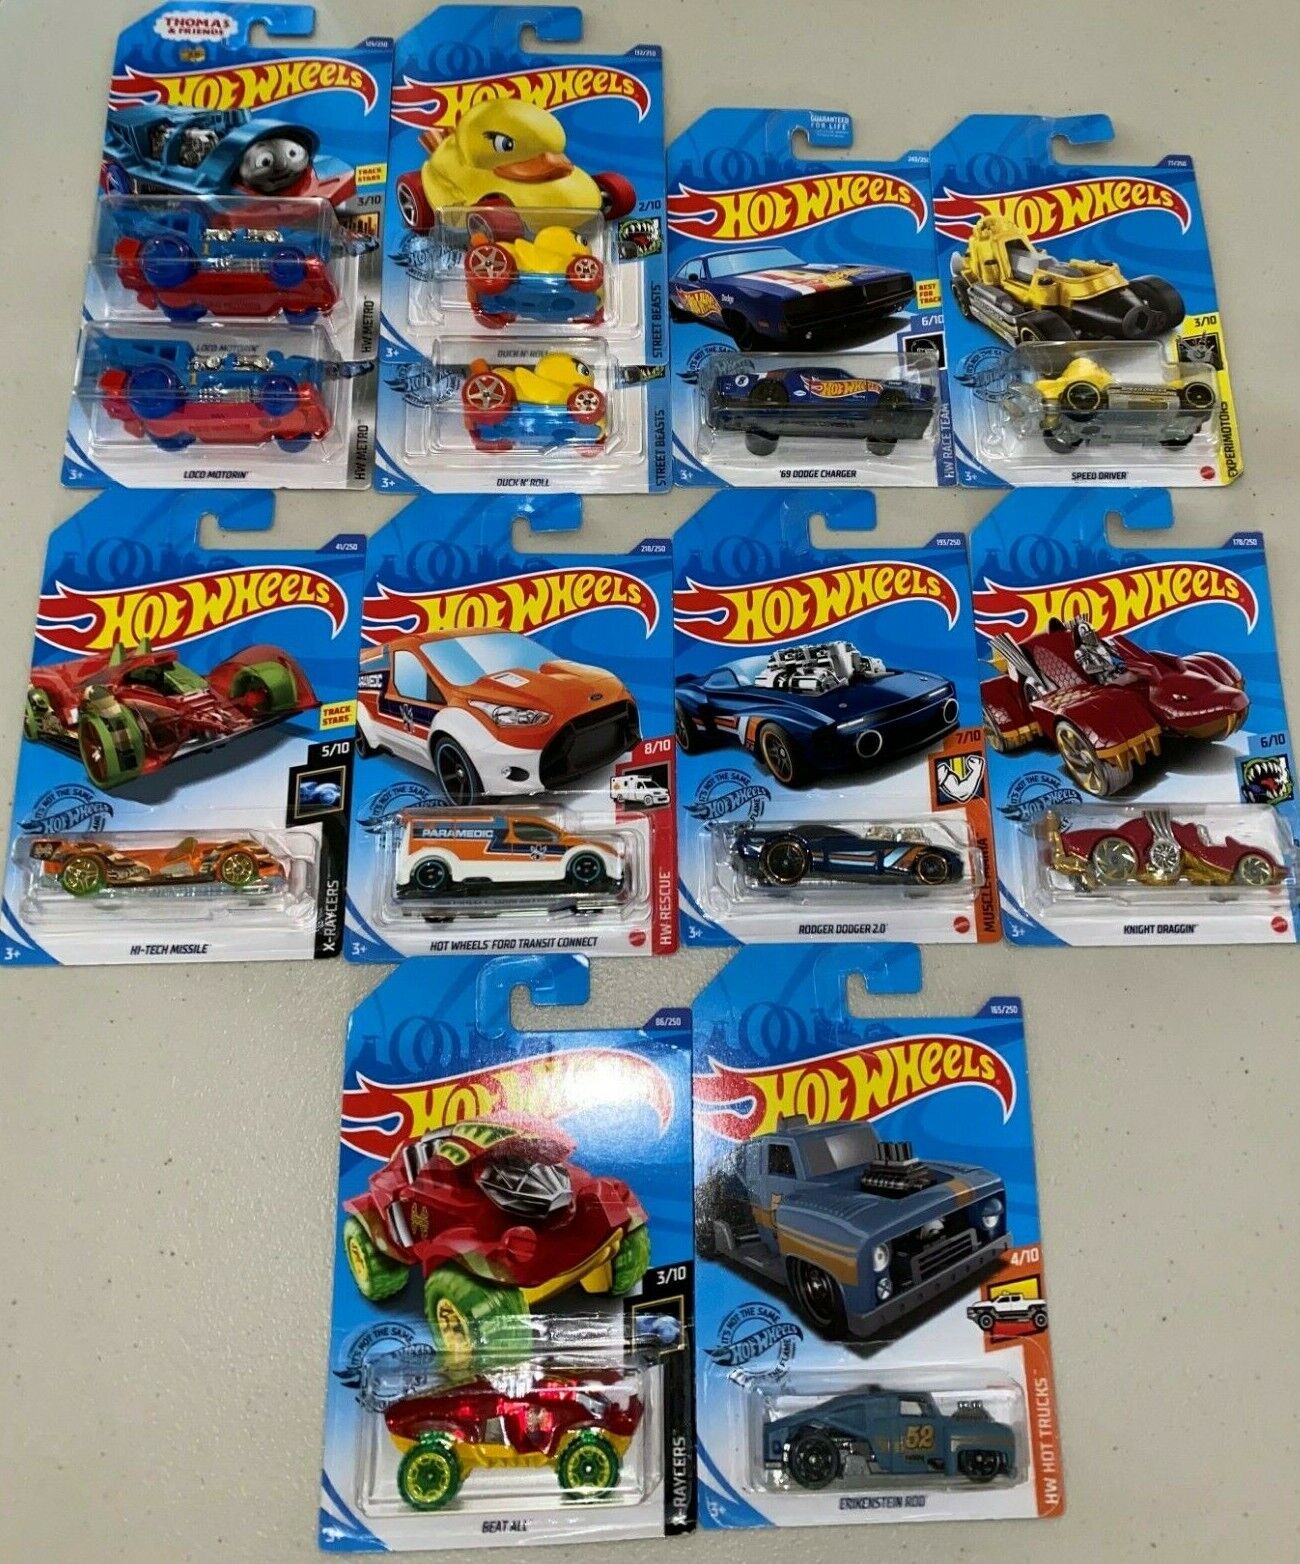 12 Count Mixed Models Cool 2019 / 2020 Hot Wheels, NEW, Ships Quickly! Hot Wheels